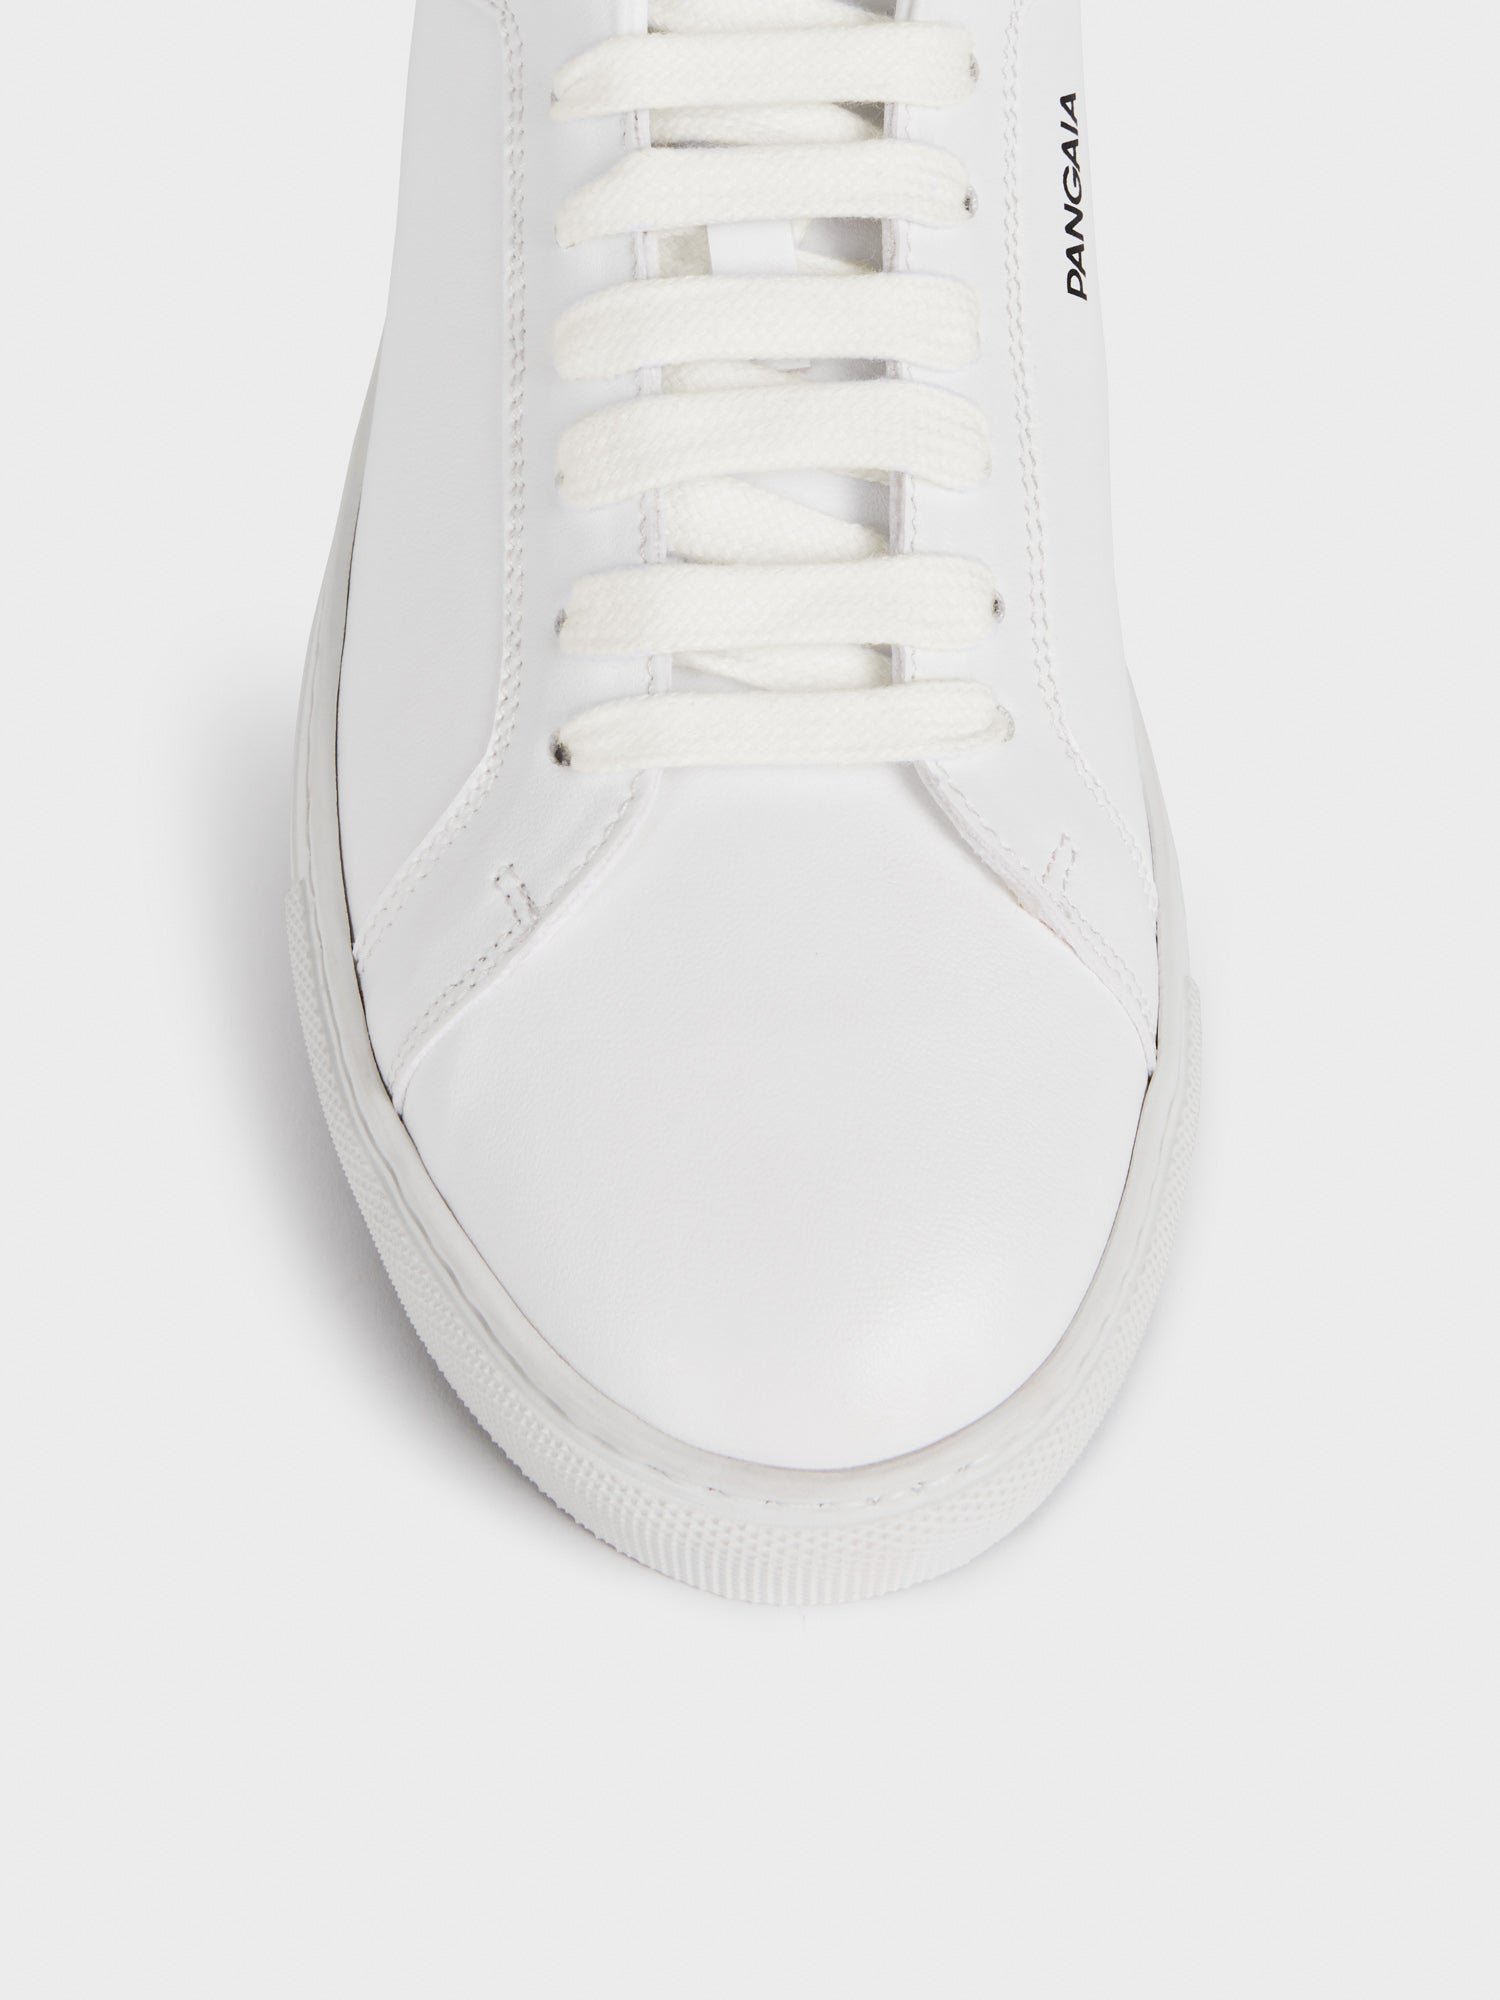 PANGAIA Grape Leather Sneaker in Off-White